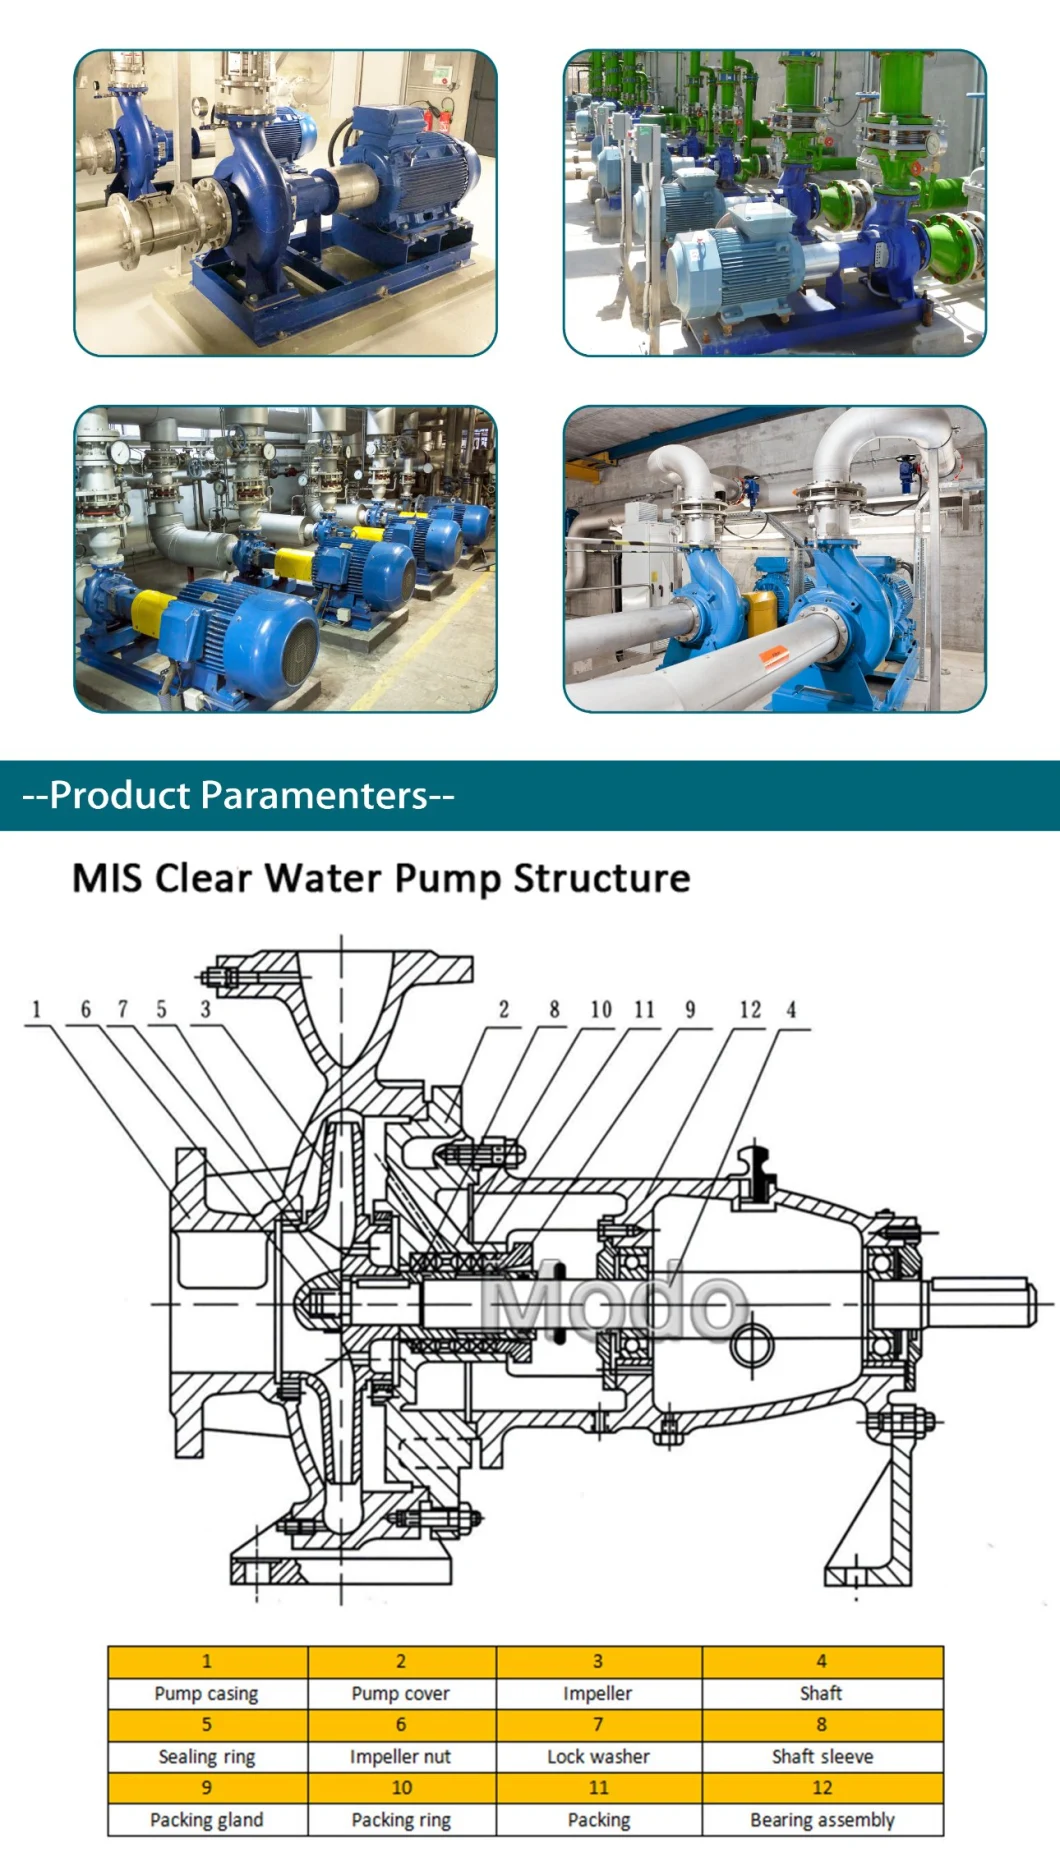 Newest Vertical Submersible Motor Driven Centrifugal High High Pressure Water Pumps for HVAC and Cooling Tower